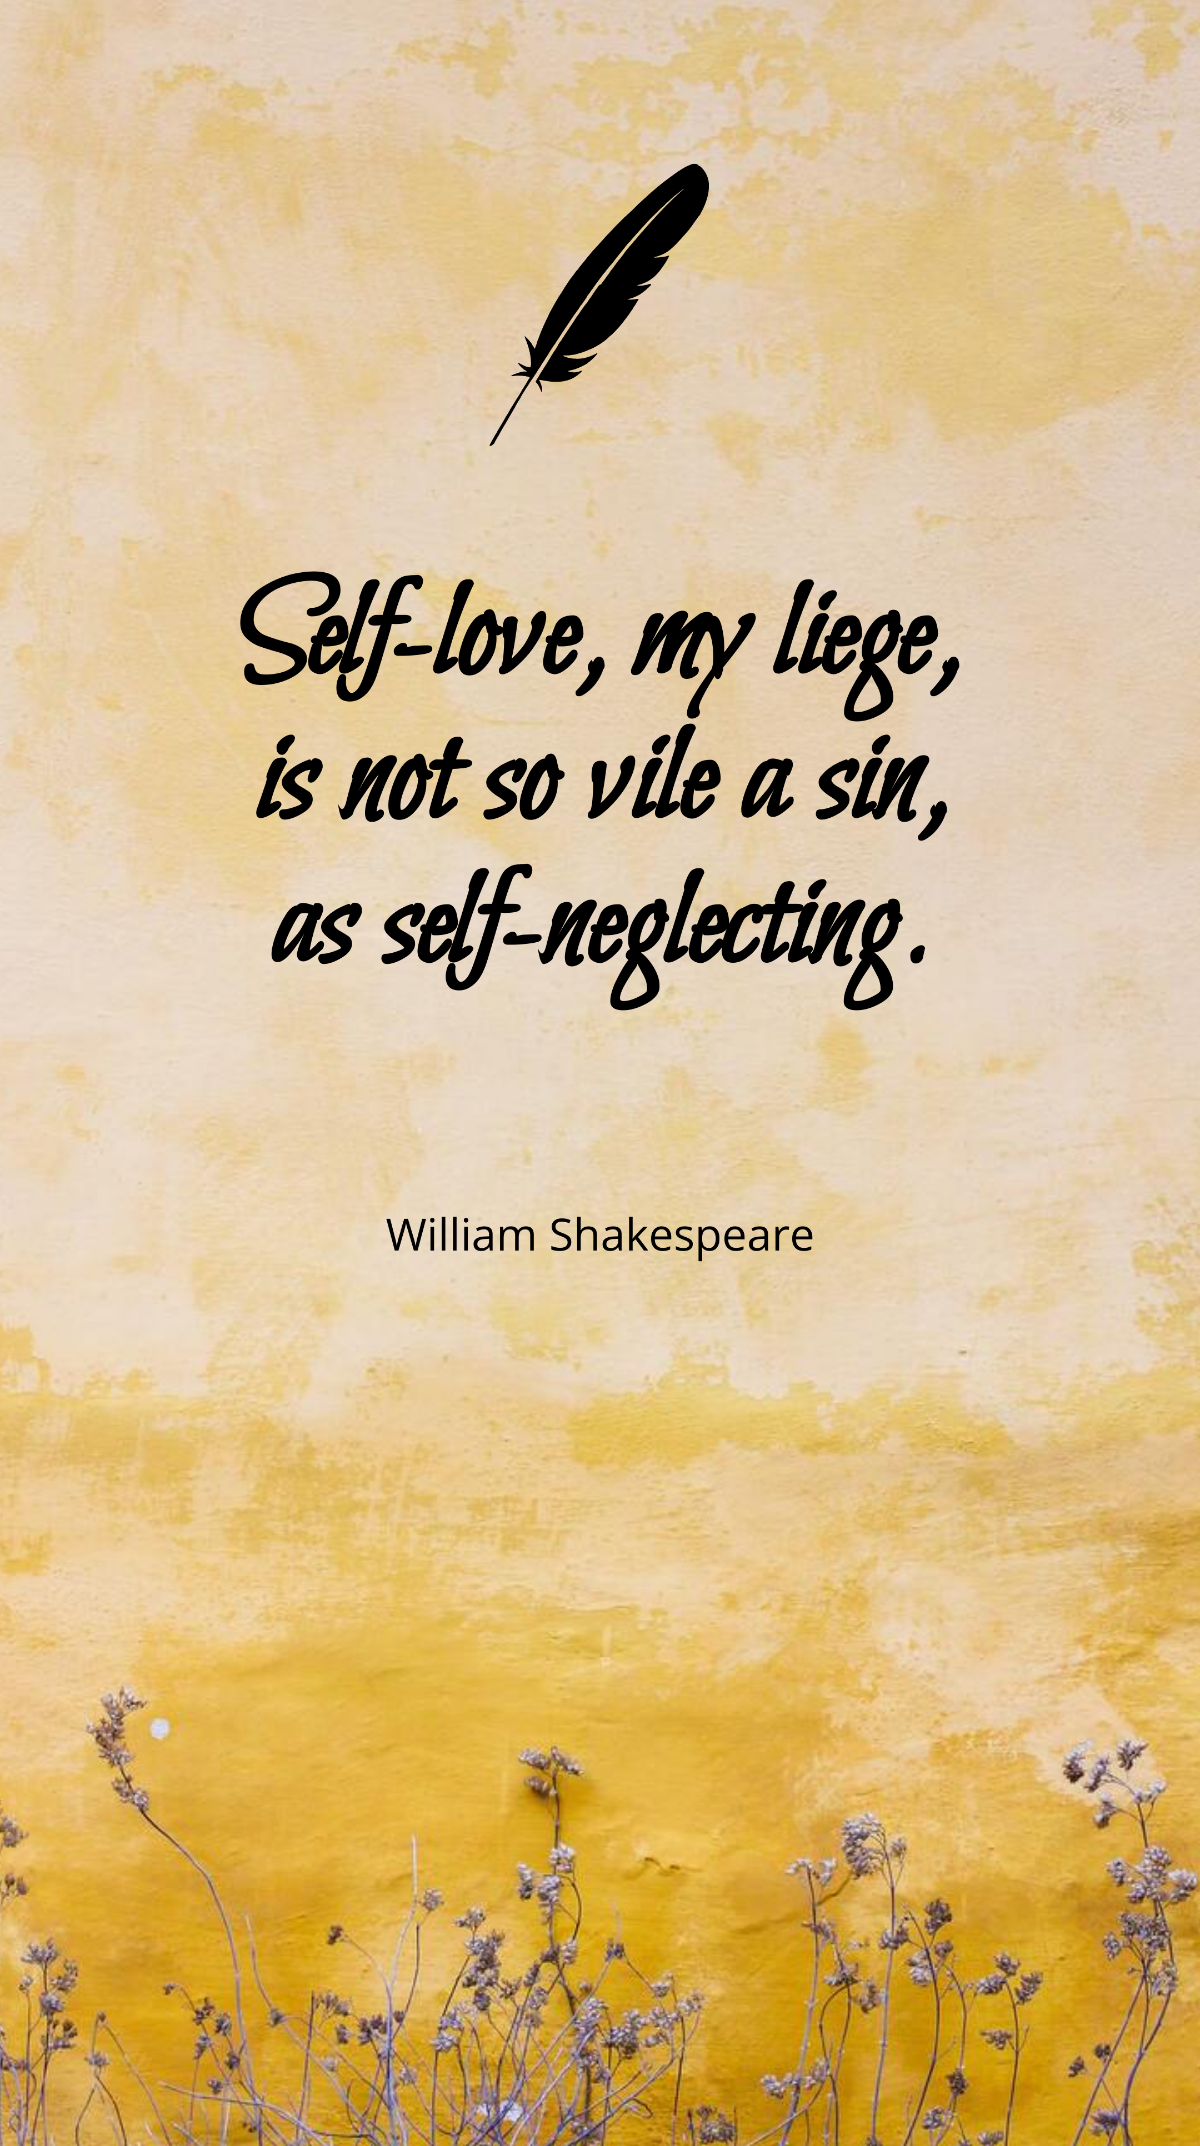 William Shakespeare - “Self-love, my liege, is not so vile a sin, as self-neglecting.”  Template